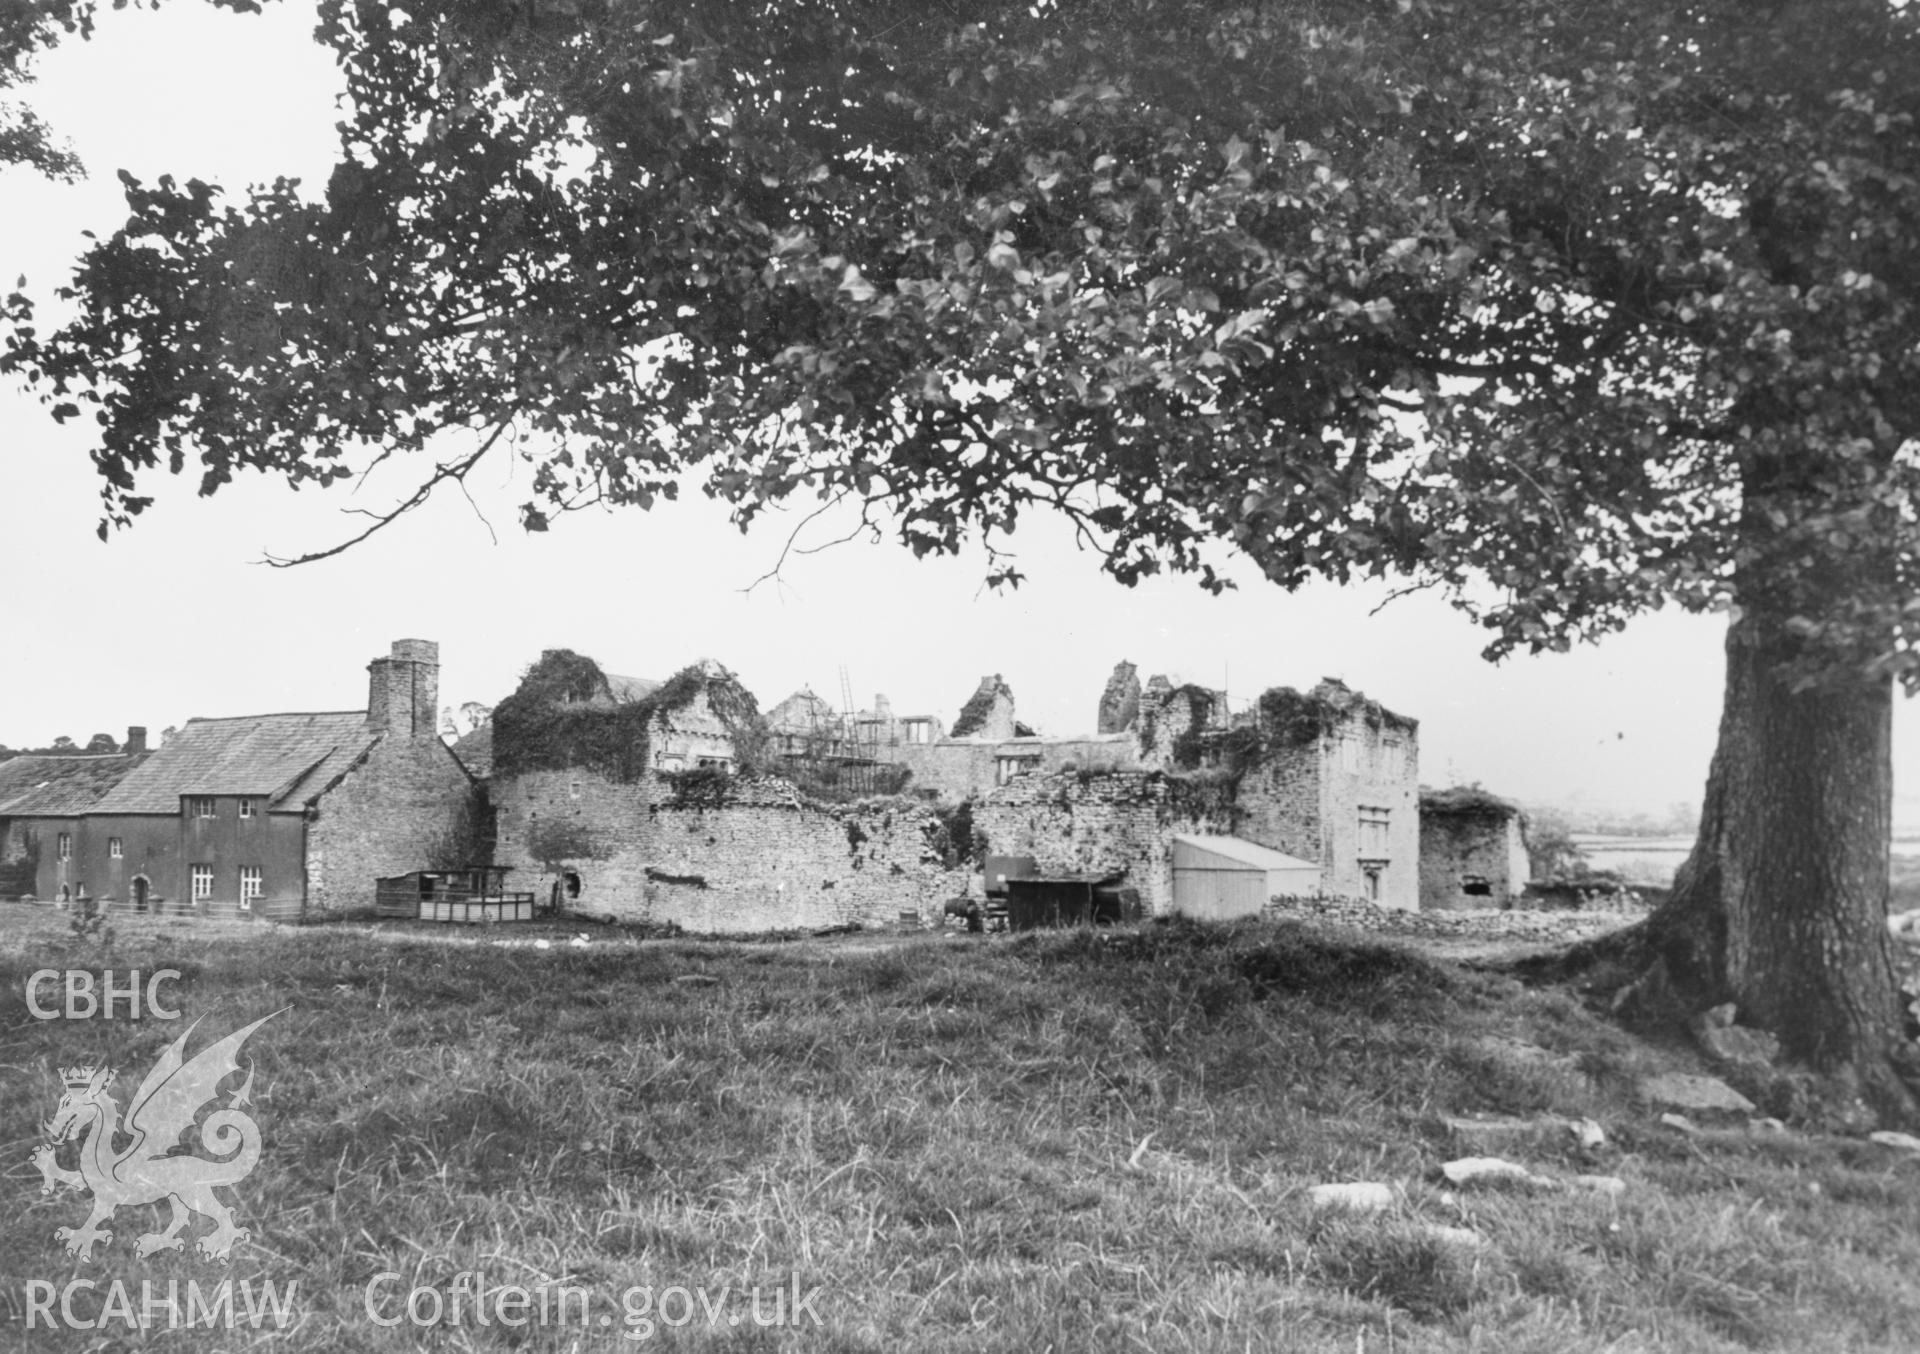 Digital copy of an acetate negative showing general view of Old Beaupre.